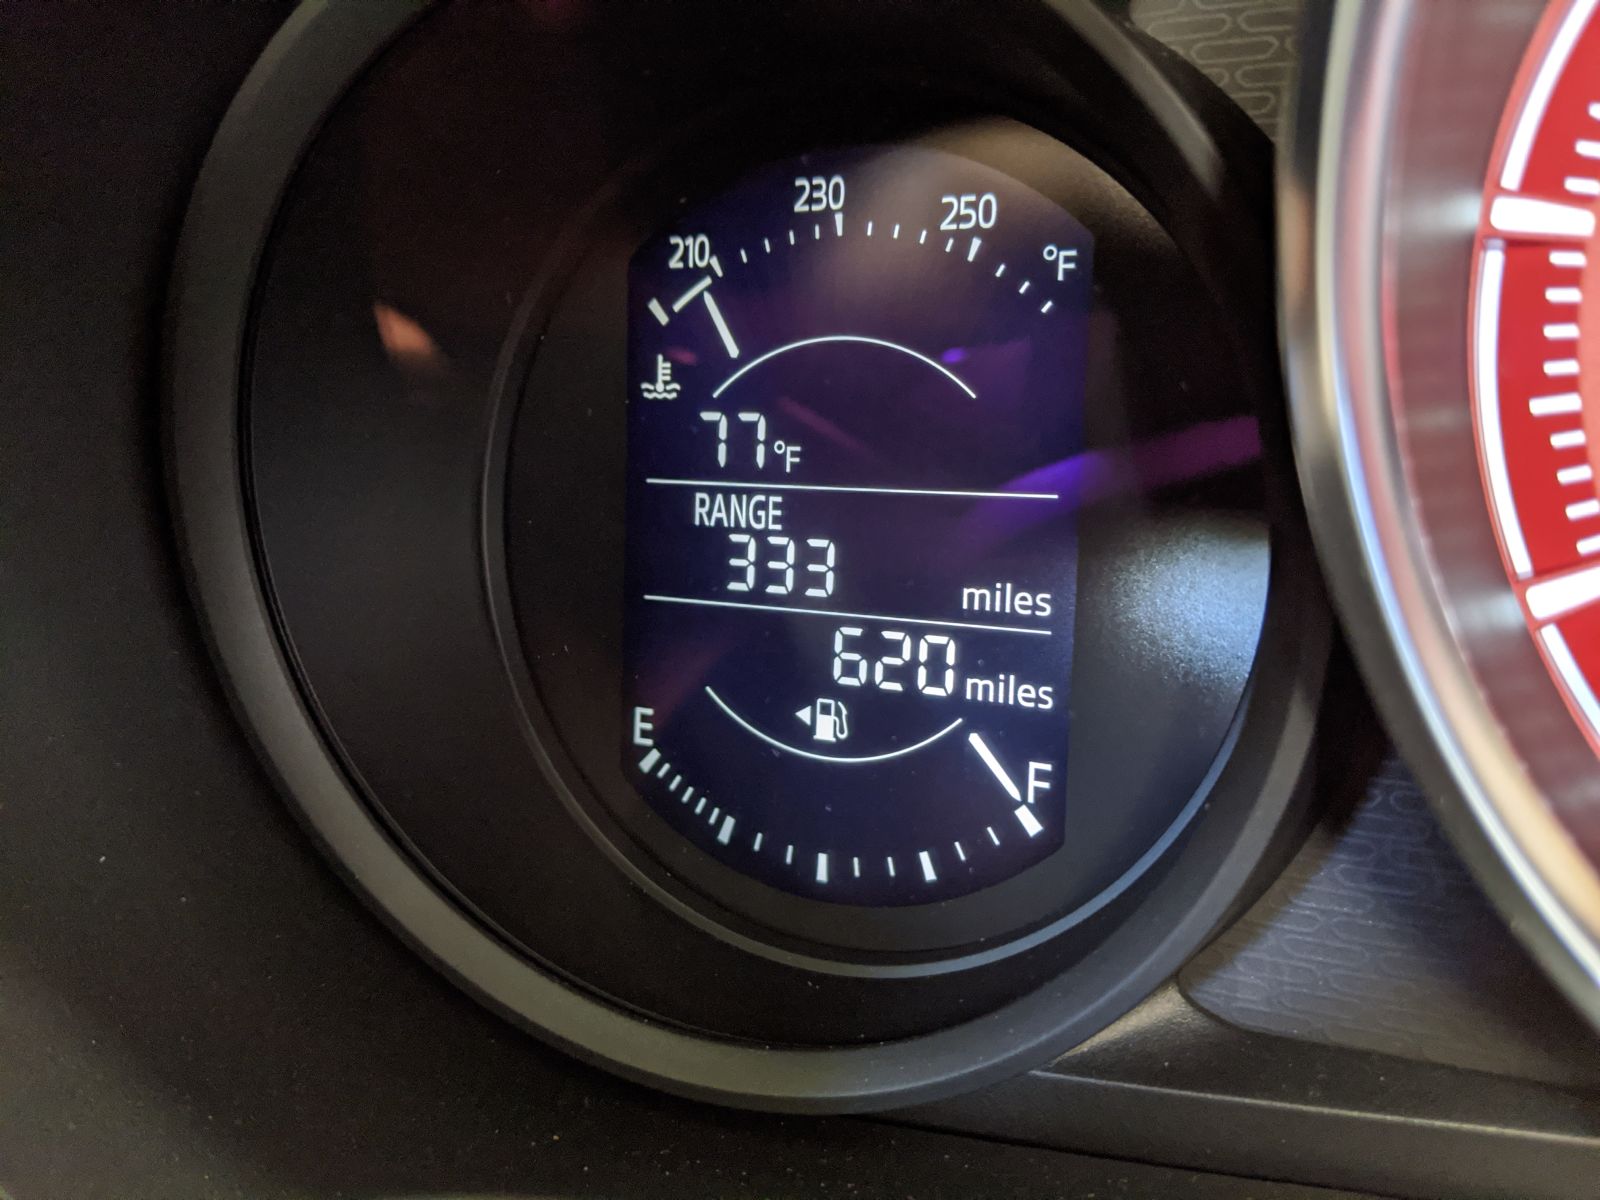 The book says 620 miles / 1,000 km which is the current exact odometer reading